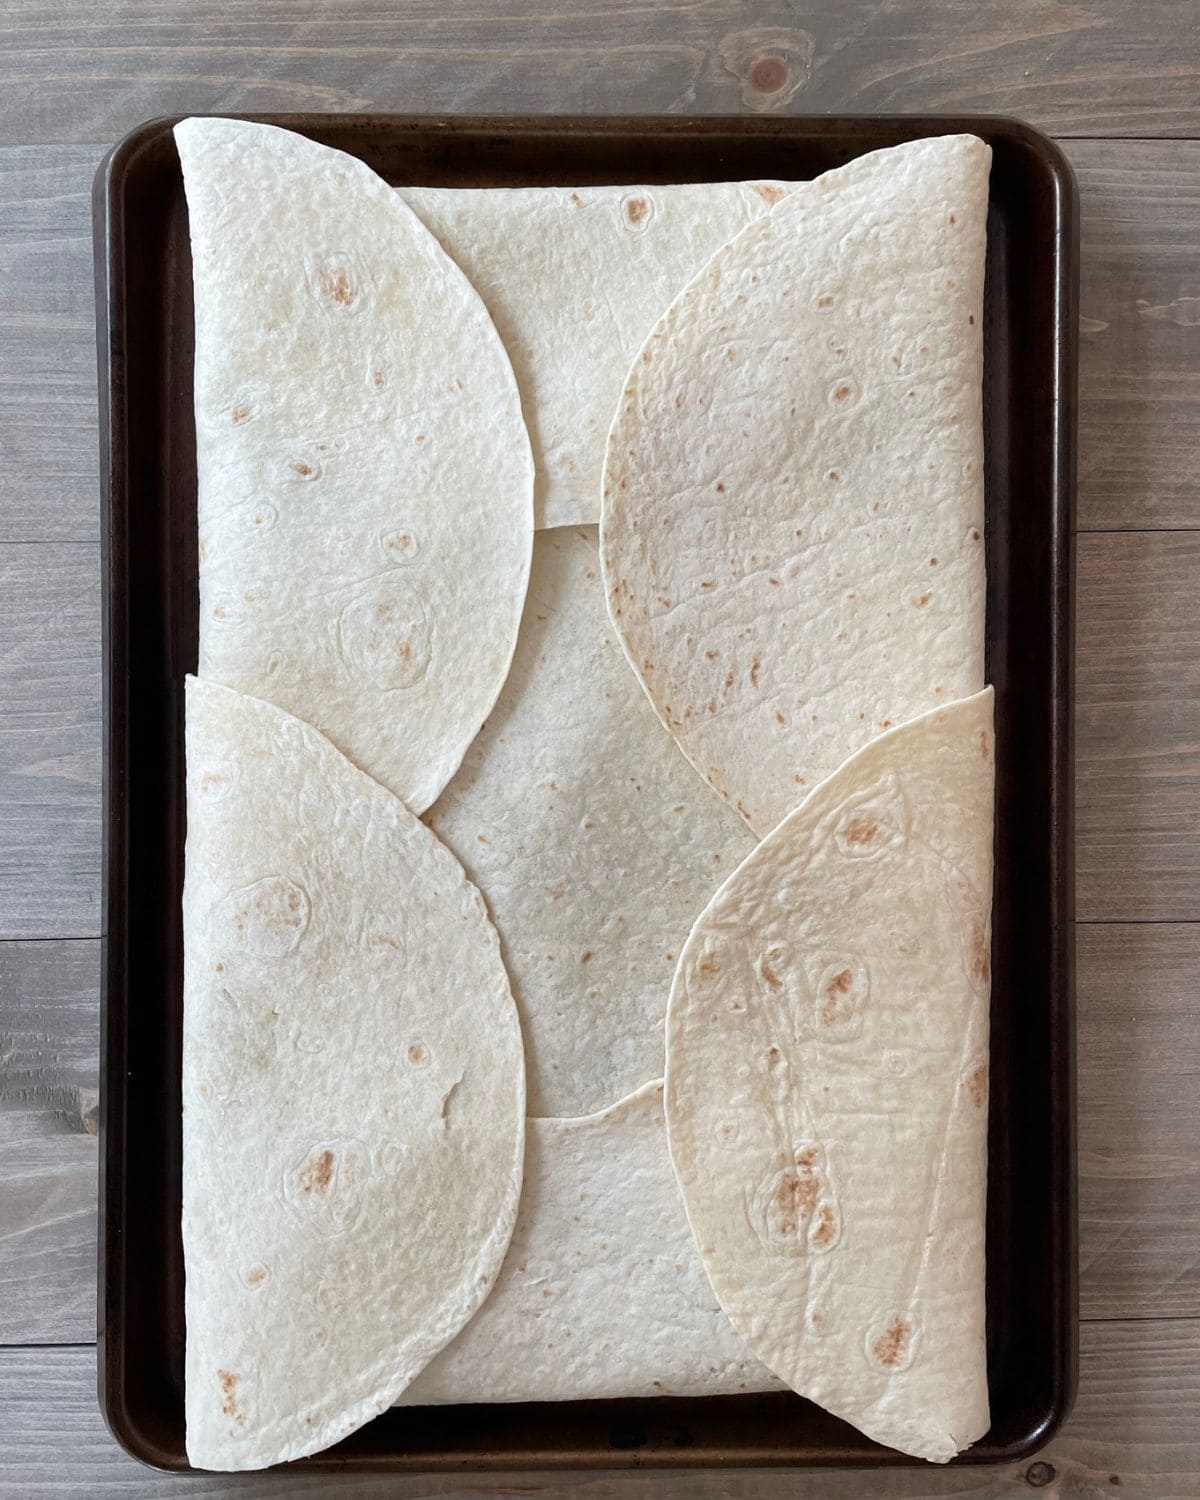 The overhanging edges of the tortillas are folded over on top of the quesadilla.